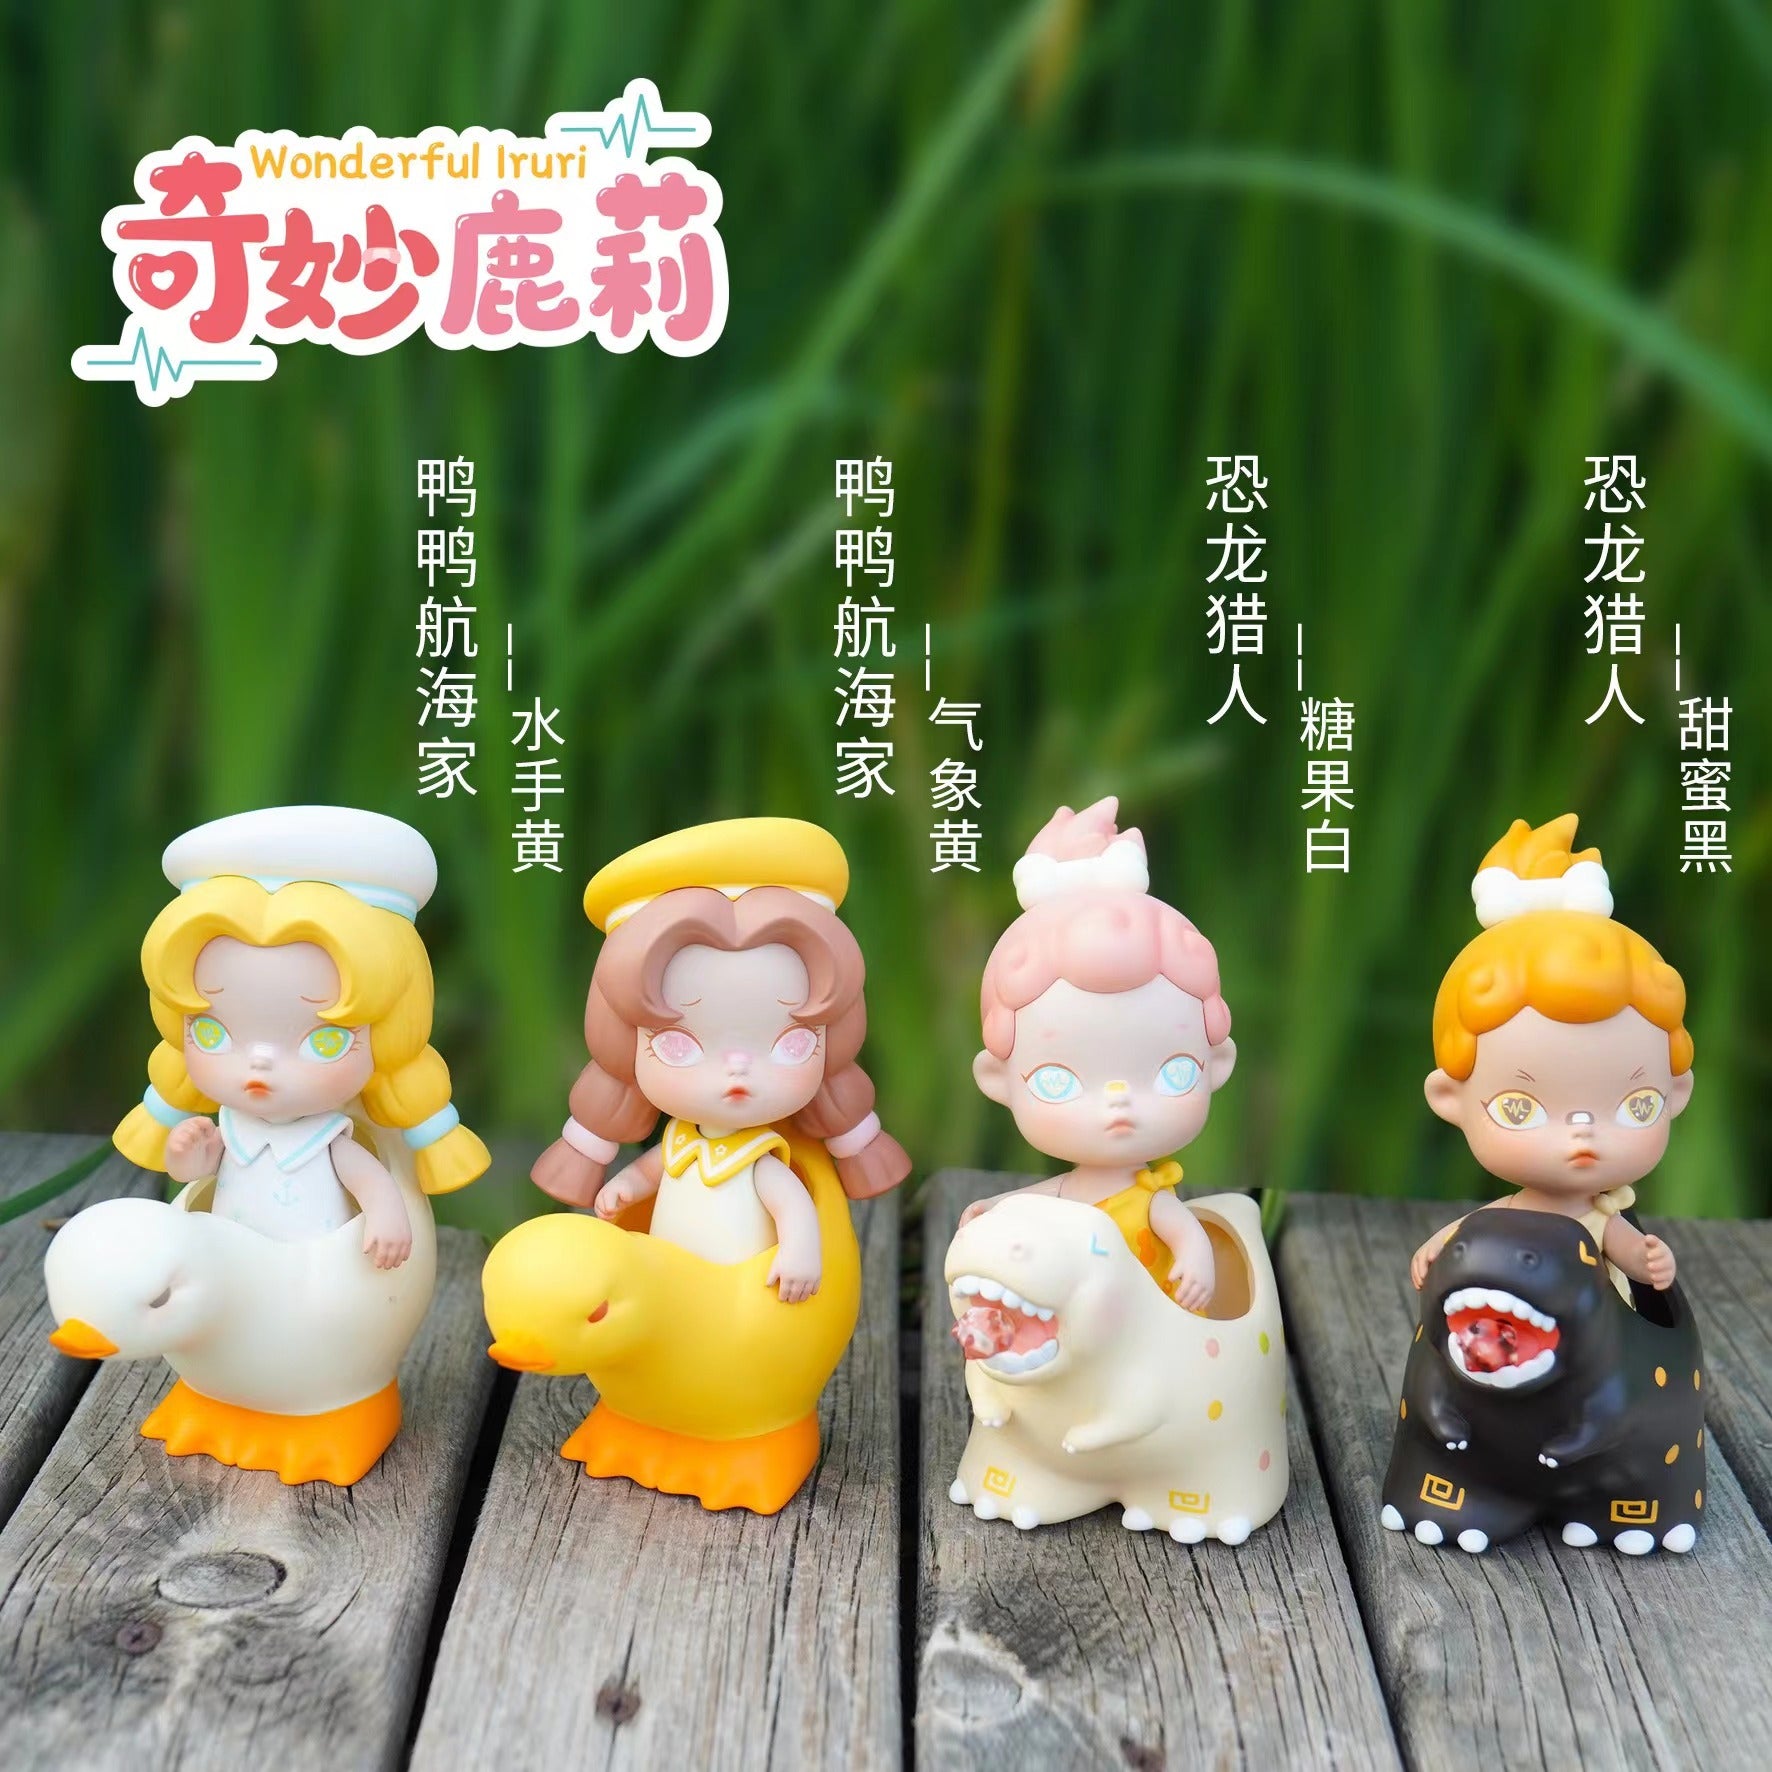 Wonderful Iruri Series from Kemelife: Small figurines, toy dolls, and cartoon characters in various poses and designs.